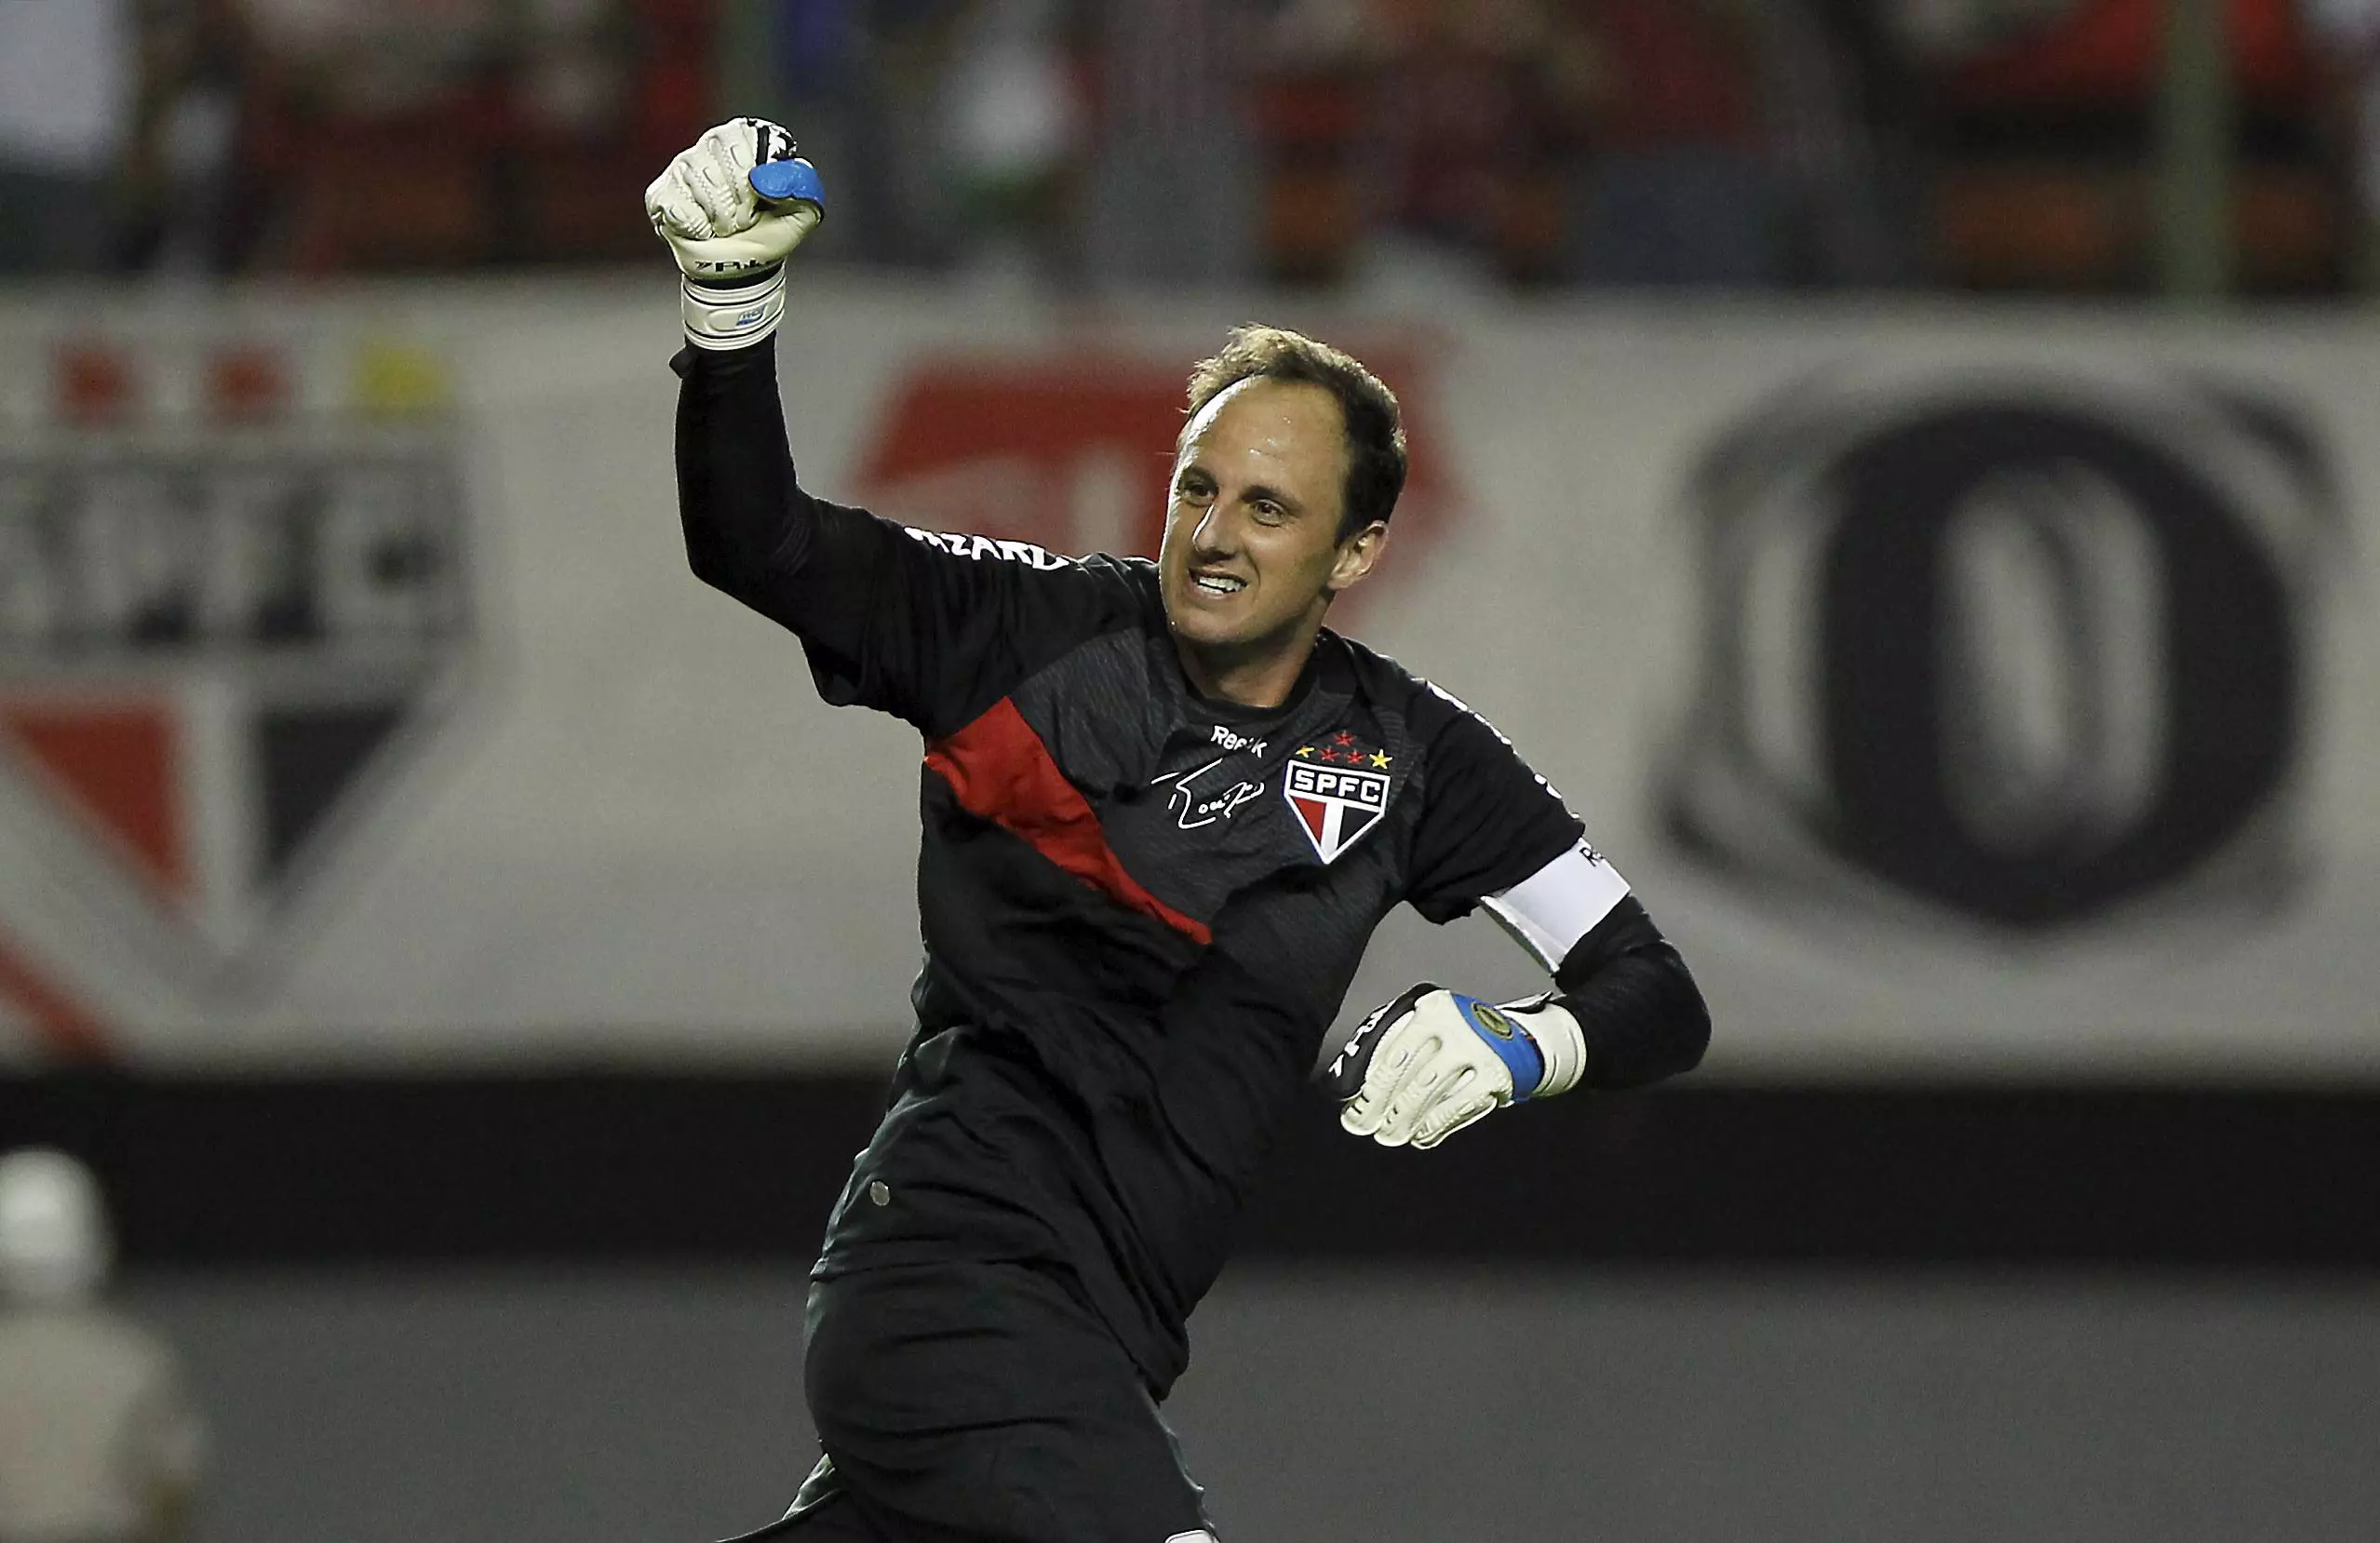 Rogerio Ceni might be a goalkeeper but he's further up the list than Messi and Ronaldo. Image: PA Images